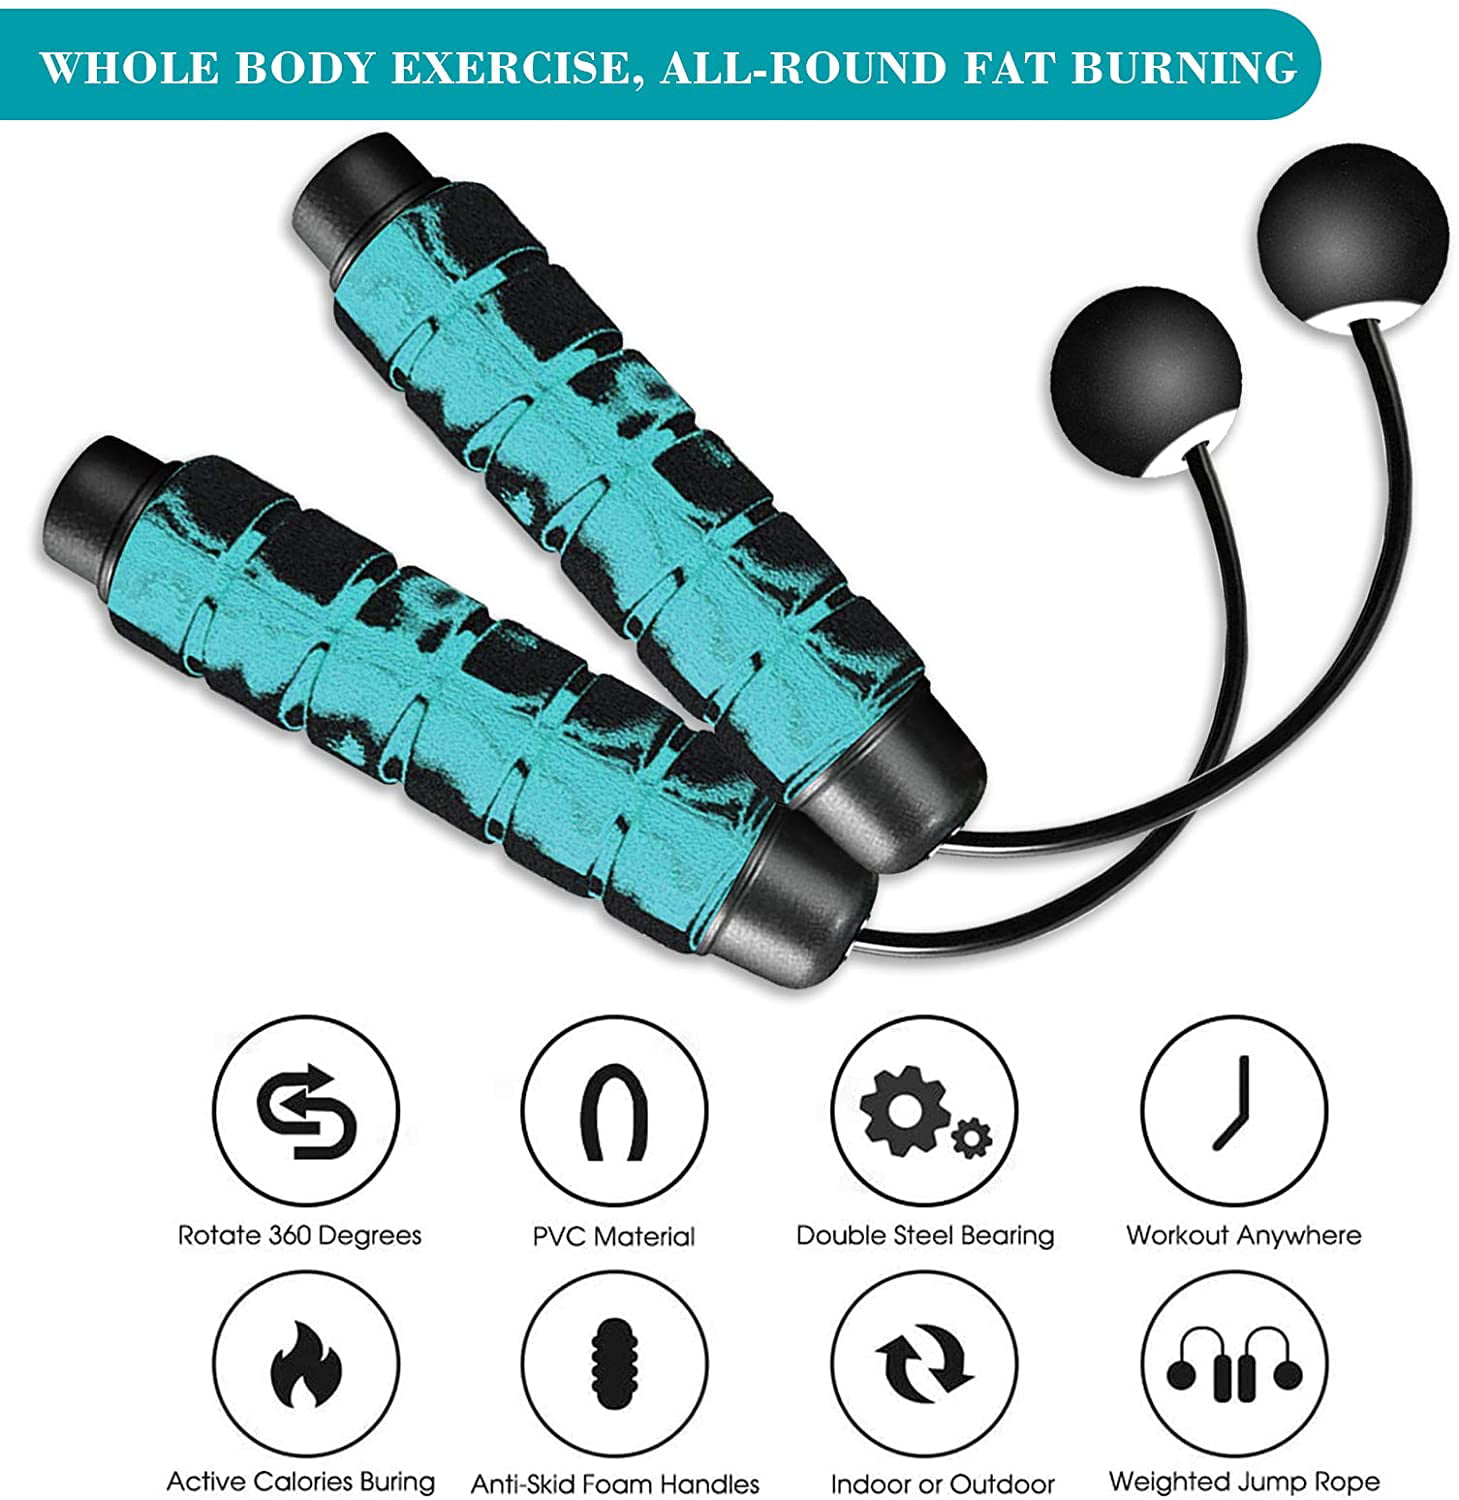 High Speed Skipping Rope for Narrow Space Ropeless Jump Rope for Crossfit Boxing MMA WOD Training Suitable for Different Ages and Levels Redify Weighted Cordless Jump Rope for Fitness